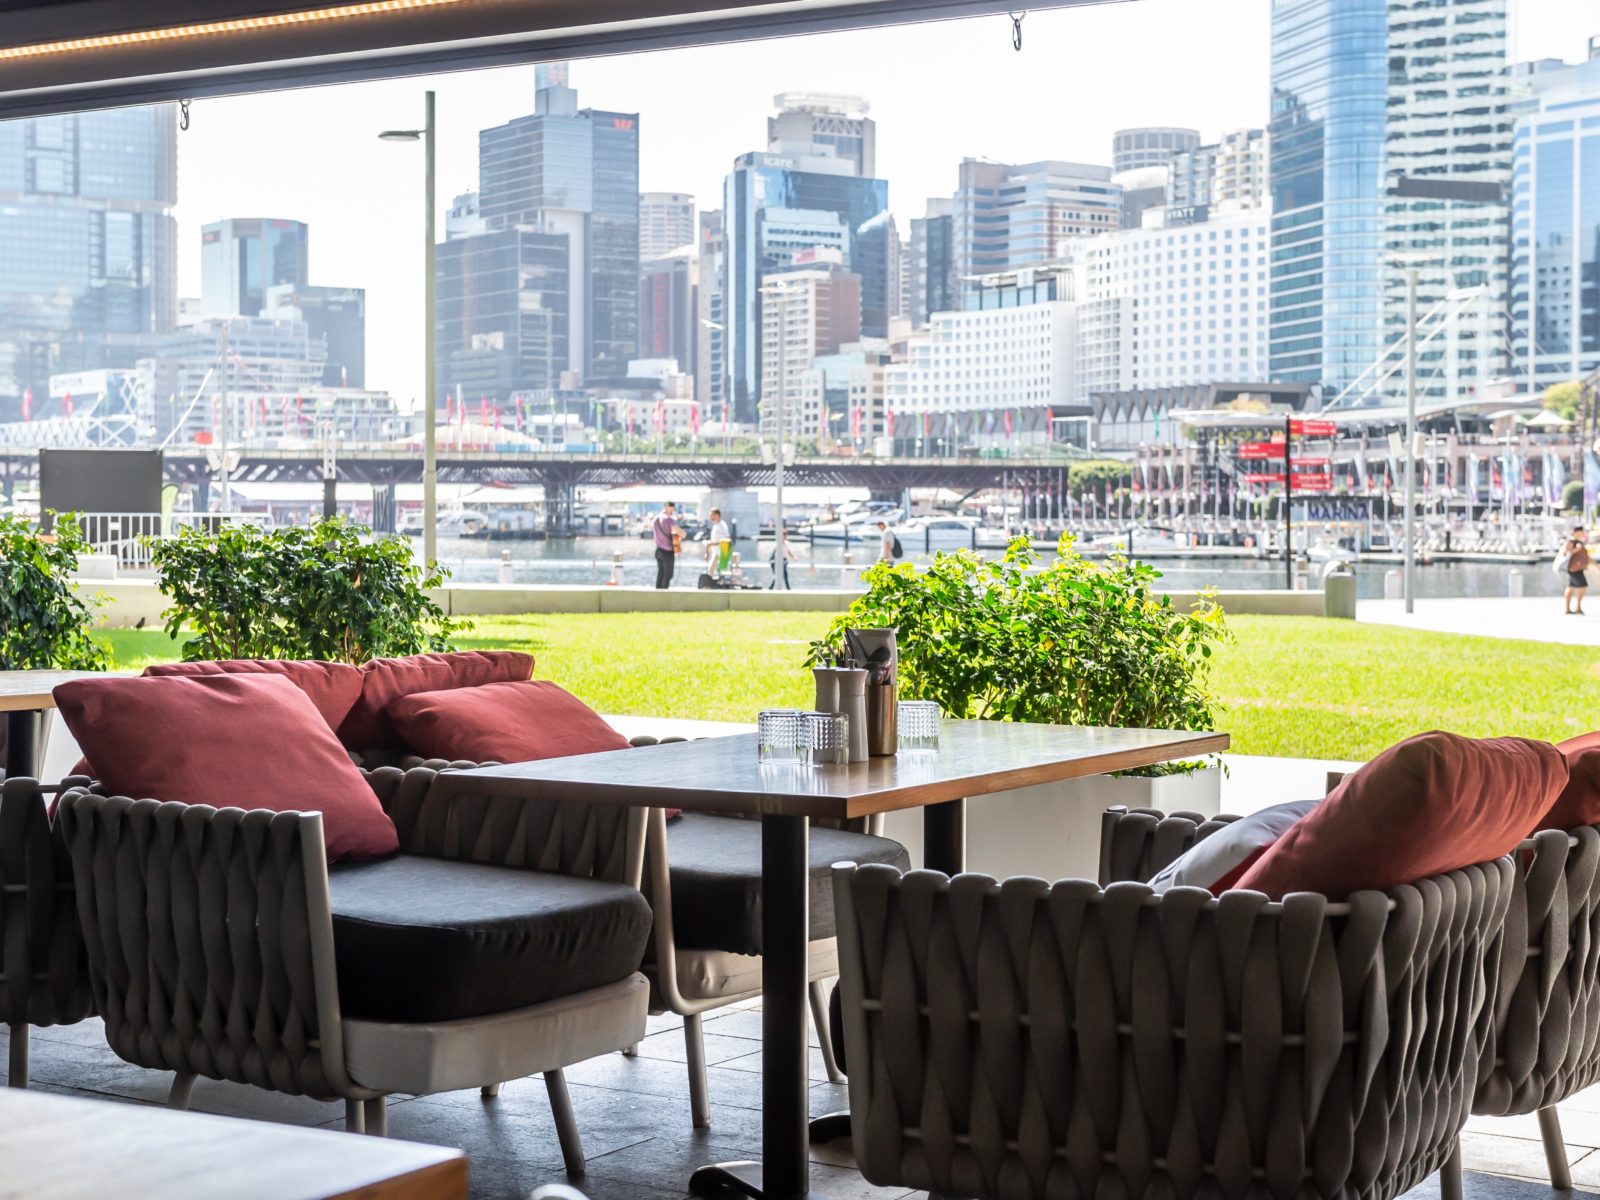 Planar Restaurant view of the city from Darling Harbour